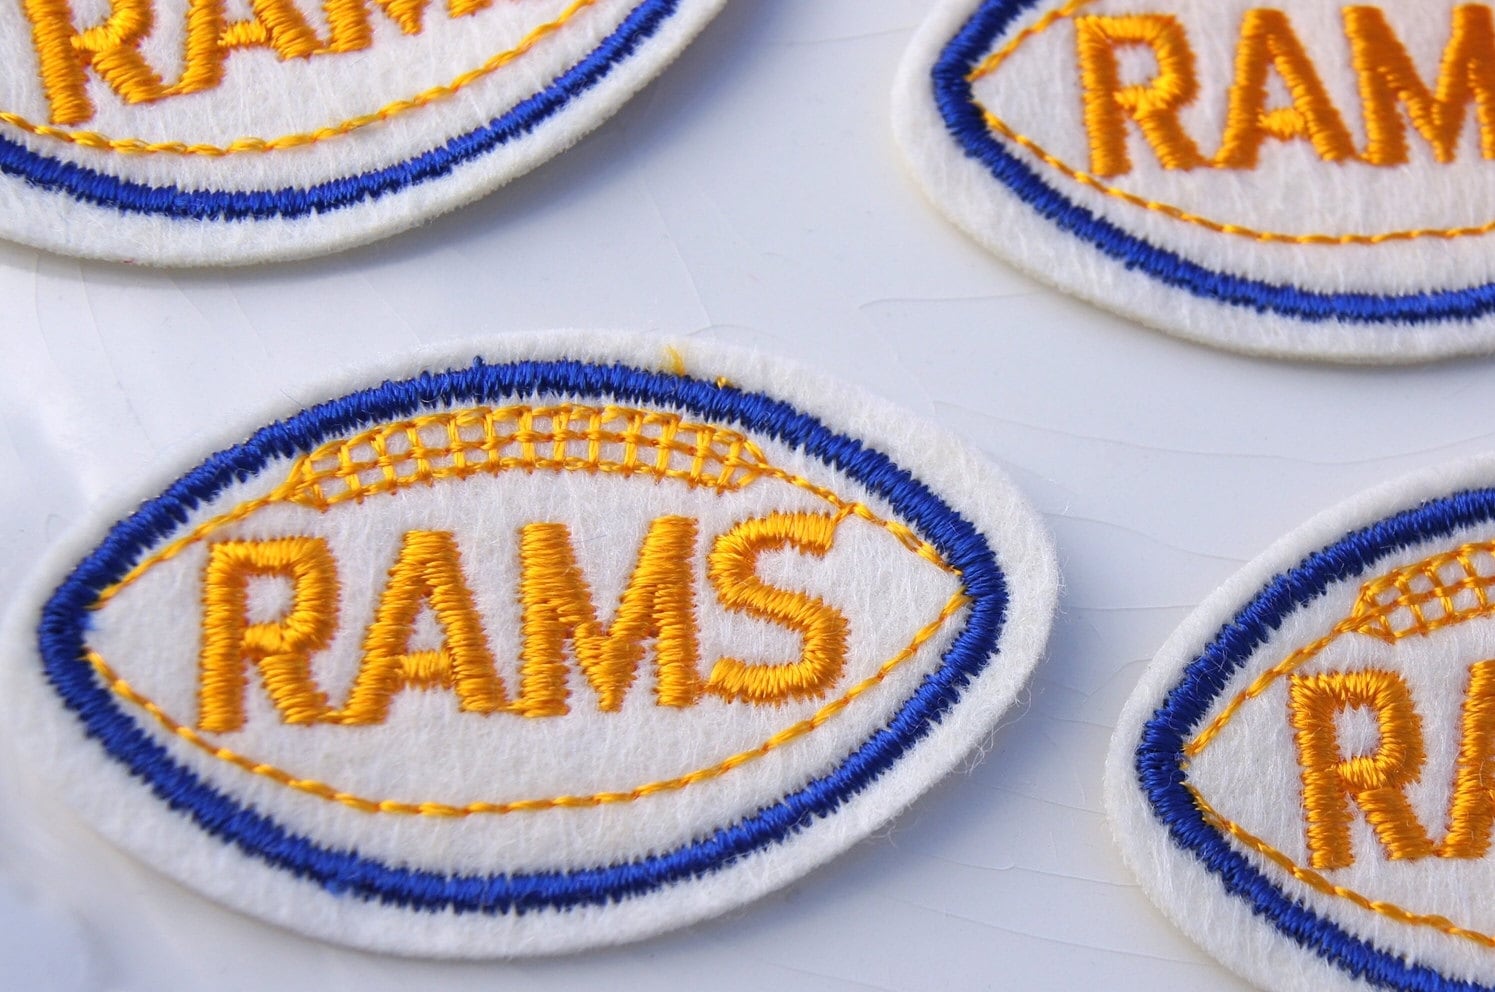 Vintage Embroidered Sports Applique Blue White Yellow Rams Football 1970S Patch Embroidery Appliques Wholesale #1220